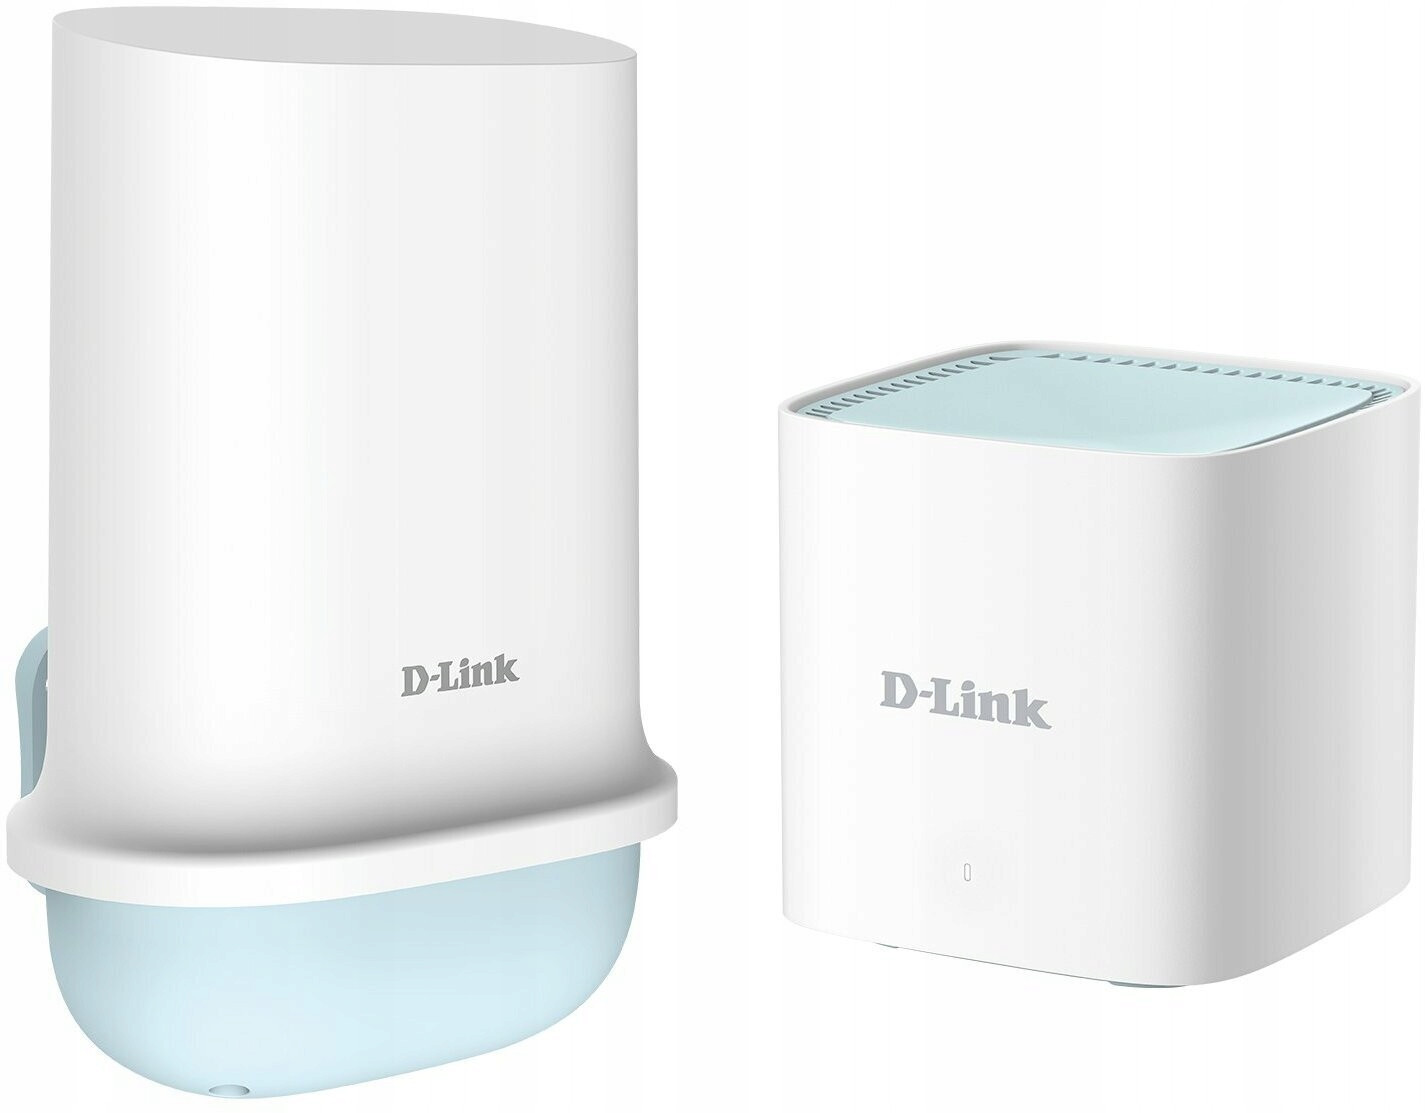 D-Link DWP-1010 Kt 802.11ax router (Wi-Fi 6)